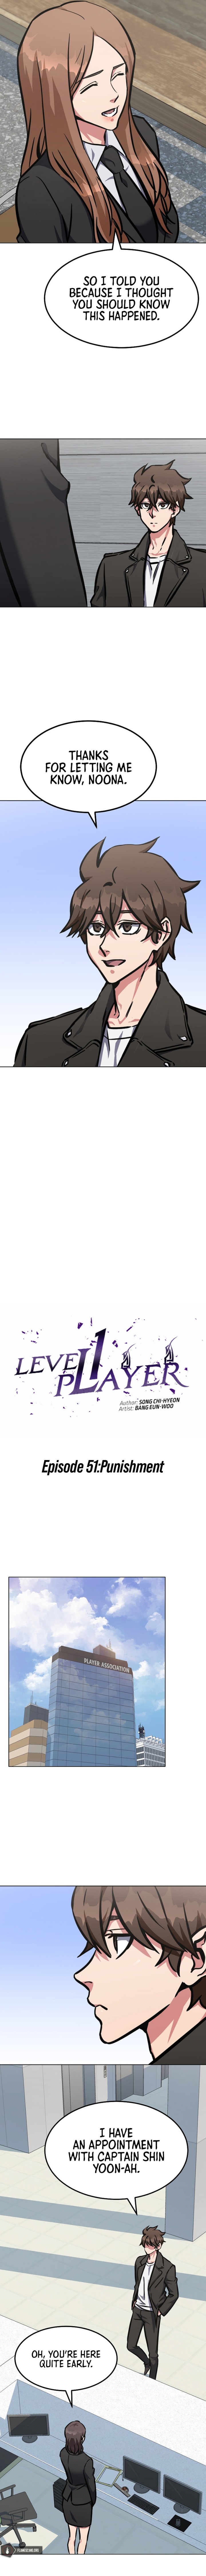 Level 1 Player - Chapter 51 Page 4